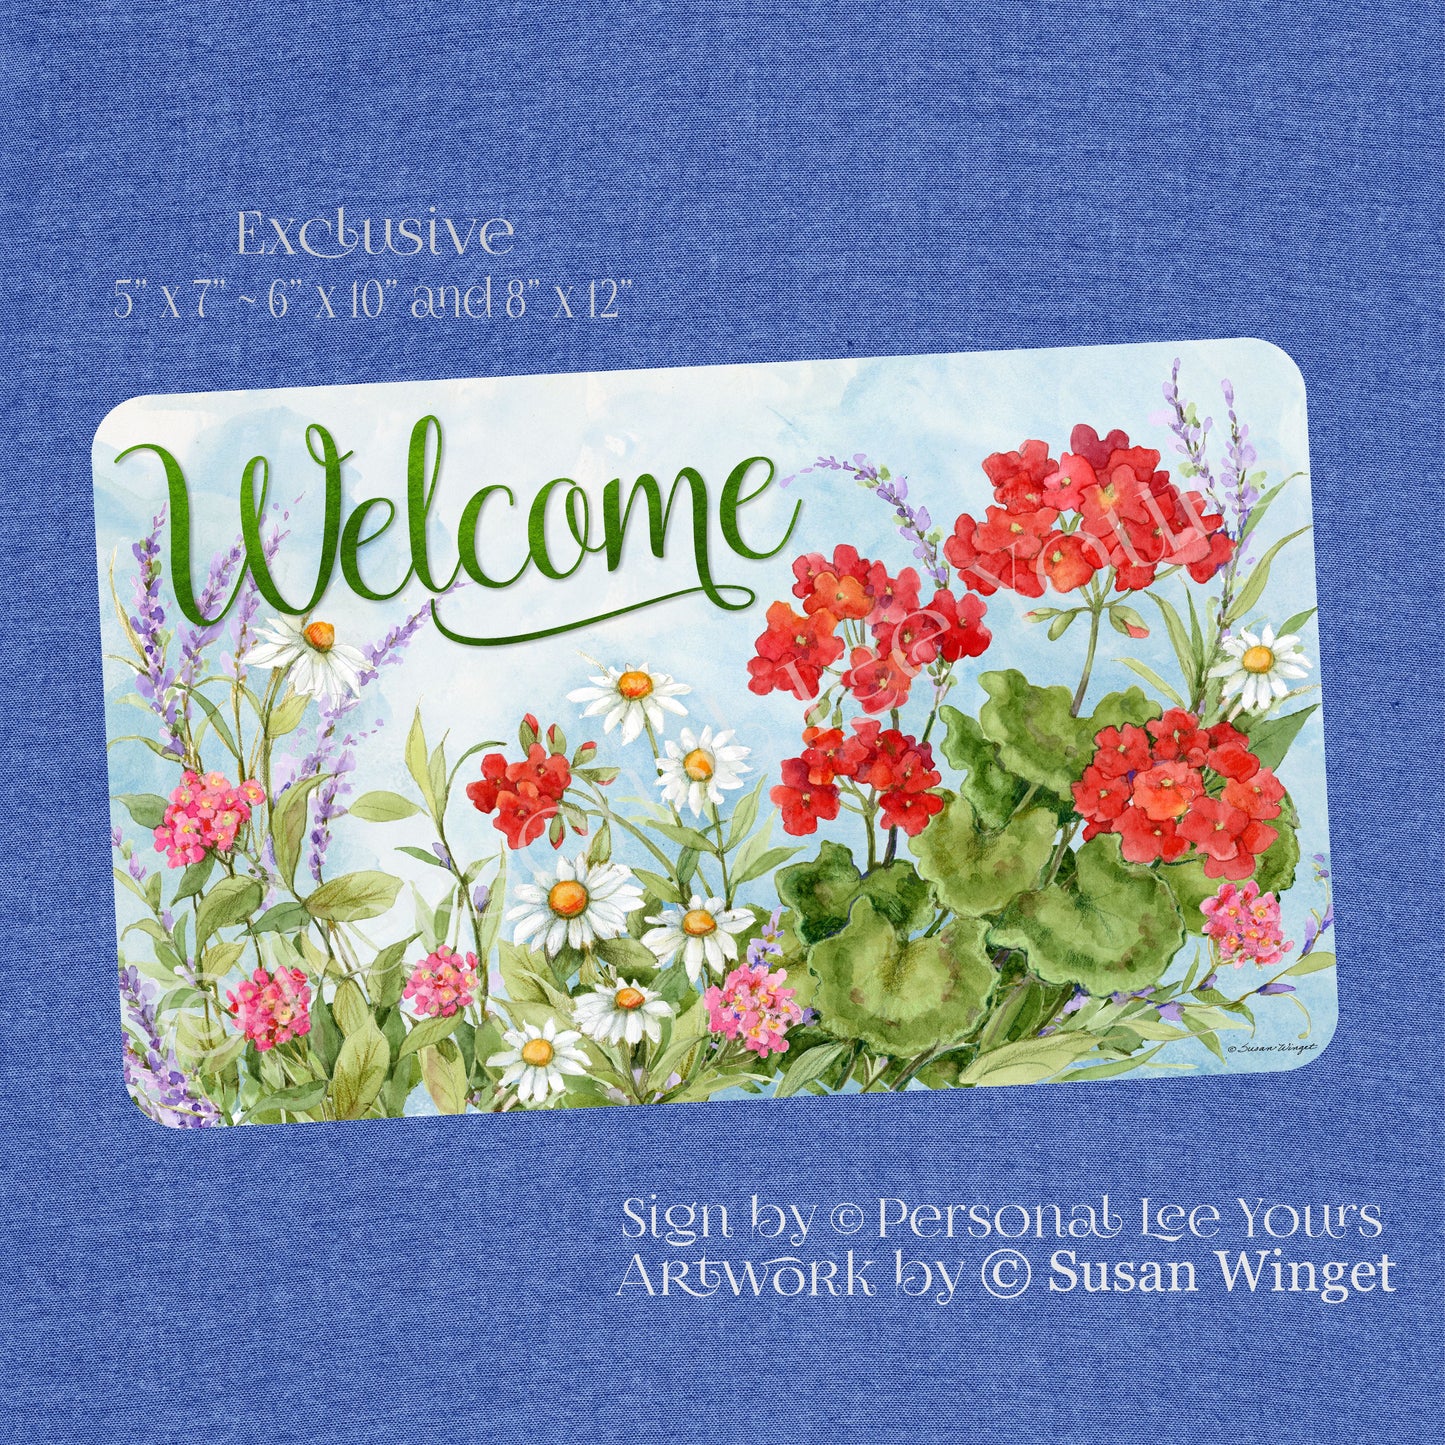 Susan Winget Exclusive Sign * Geraniums And Daisies Welcome * 3 Sizes * Lightweight Metal